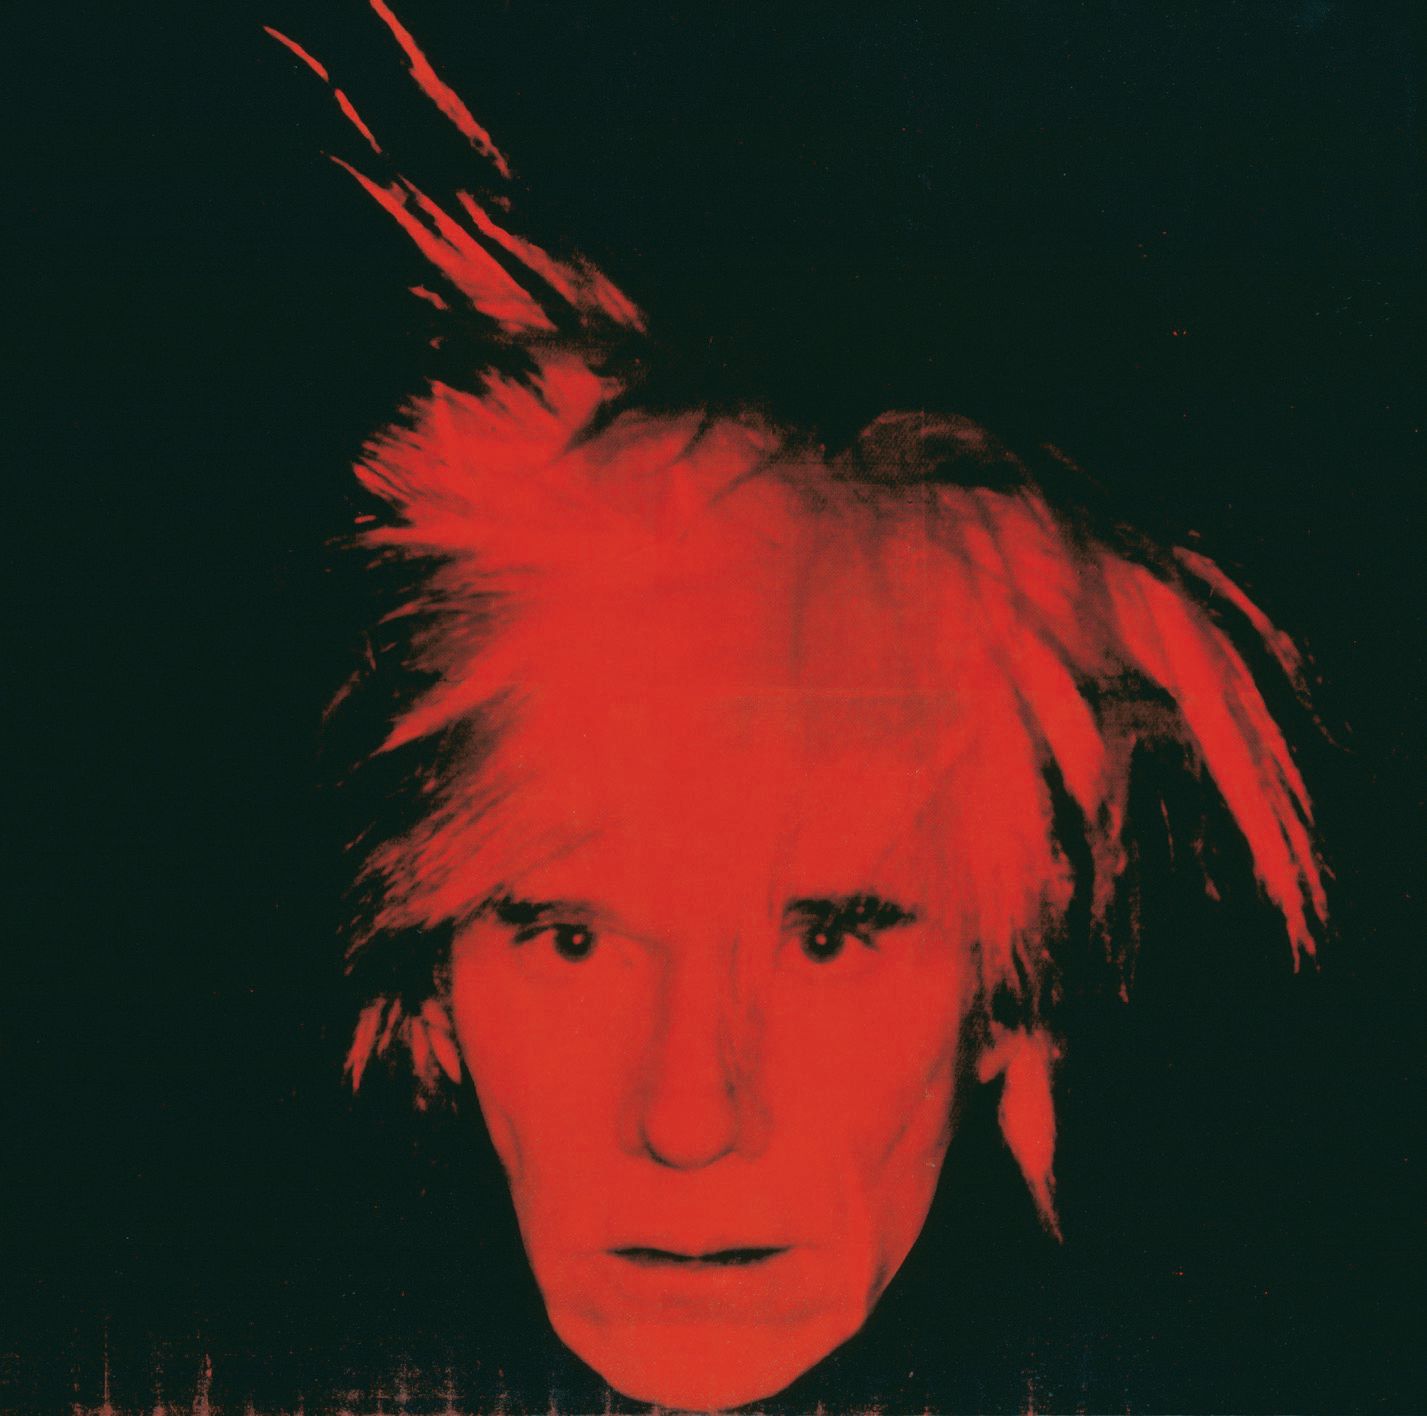 Andy Warhol, “Self-Portrait” (1986, acrylic paint and screenprint on canvas), 2,032 by 2,032 mm PHOTO COURTESY OF ASPEN ART MUSEUM, © 2021 THE ANDY WARHOL FOUNDATION FOR THE VISUAL ARTS, INC. / LICENSED BY ARTISTS RIGHTS SOCIETY (ARS), NEW YORK, PHOTO © TATE